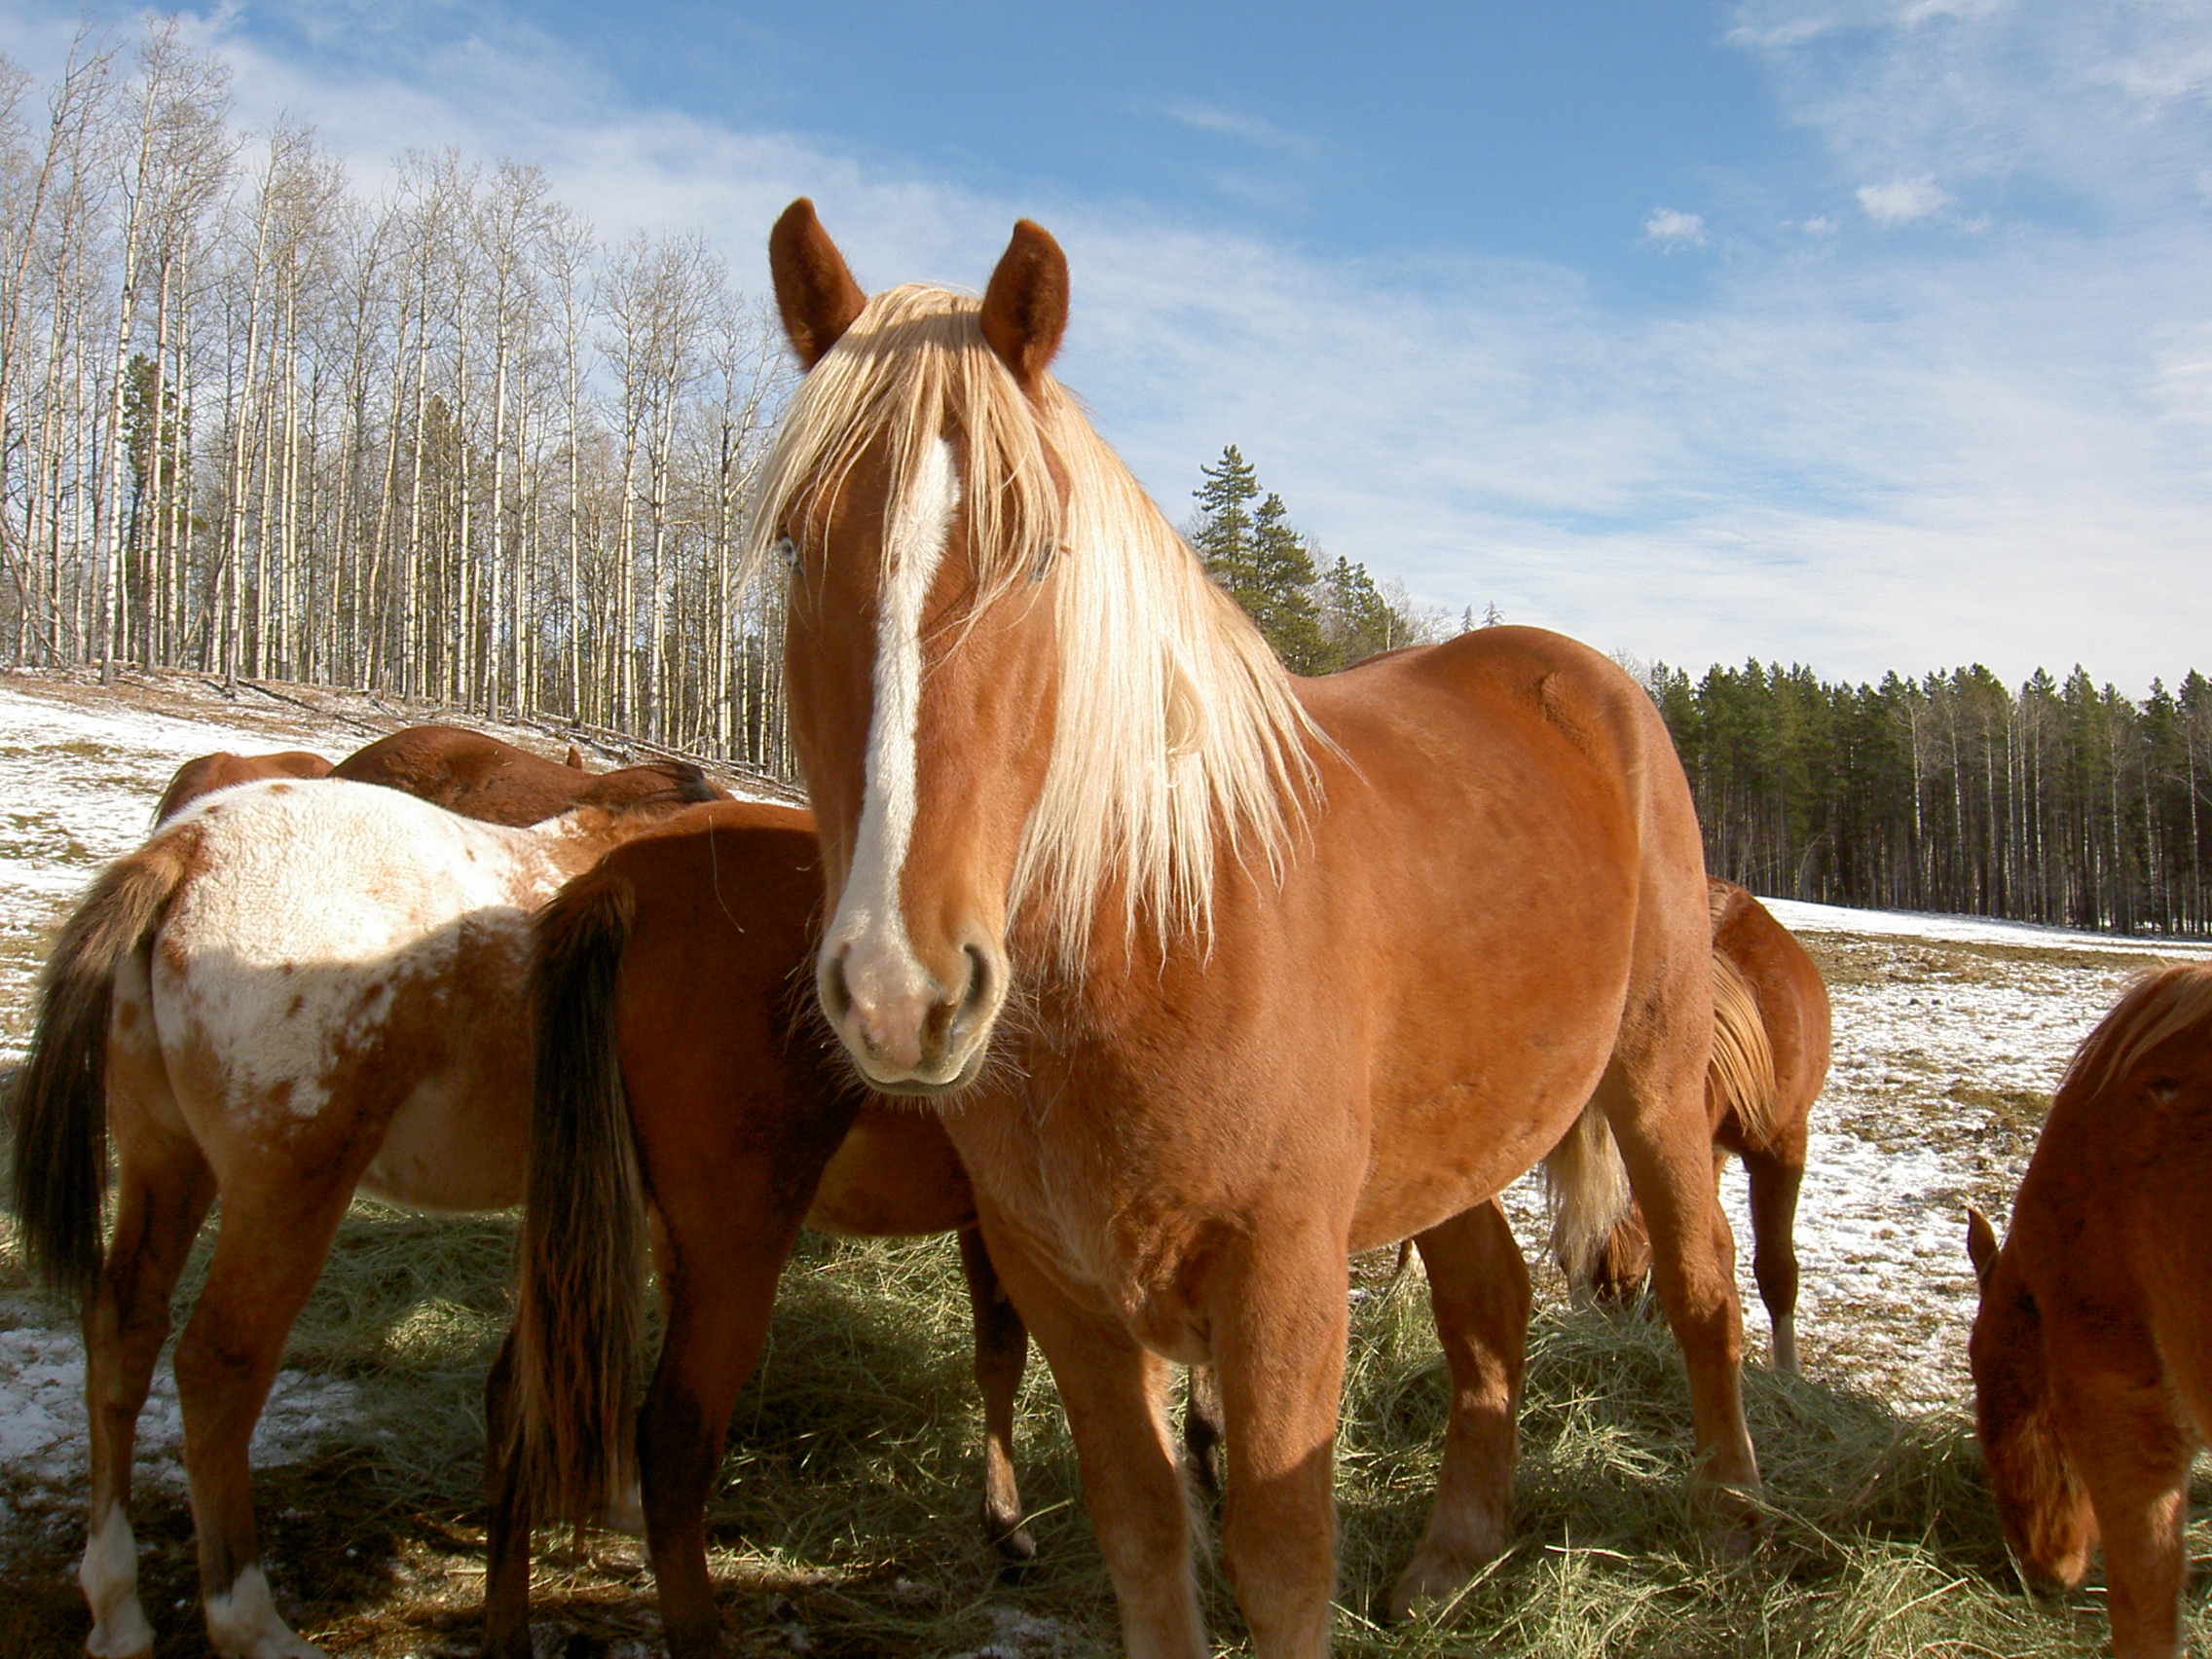 3 Horses That Were Saved From Slaughter Thanks to Kind People